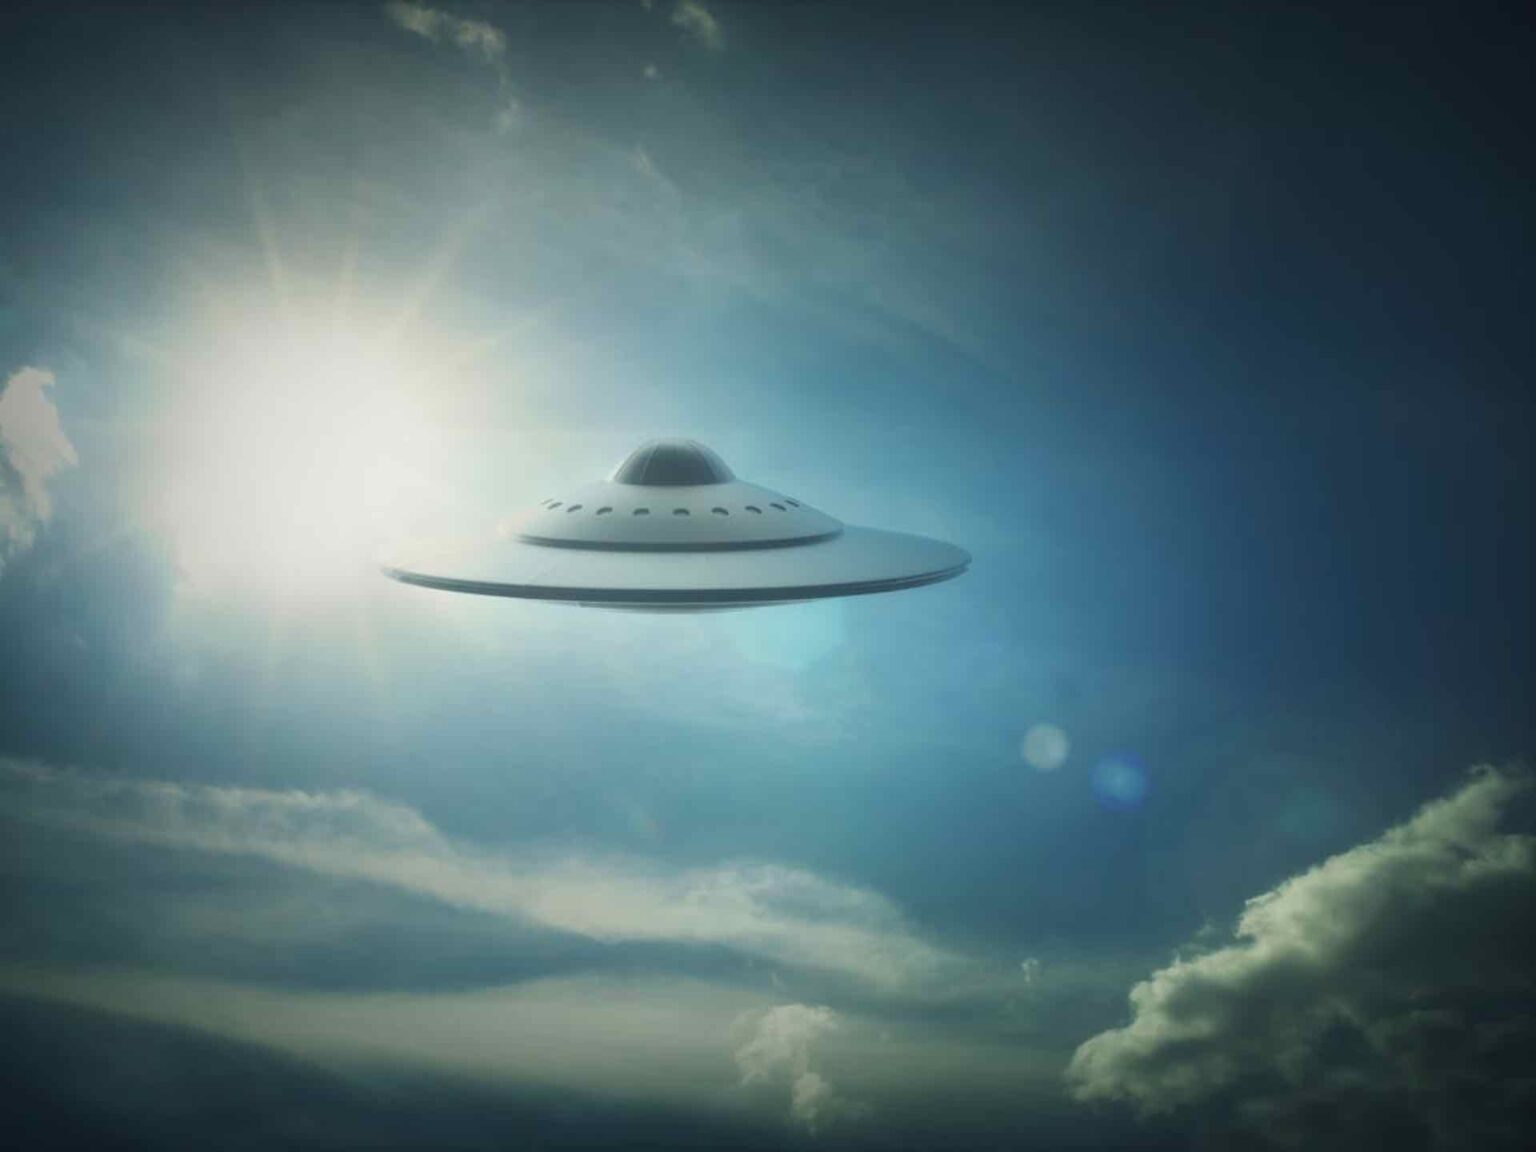 UFO sightings have been occurring for a rather long time, and have captured the imagination of U.S. citizens for decades. Here's the latest UFO news.